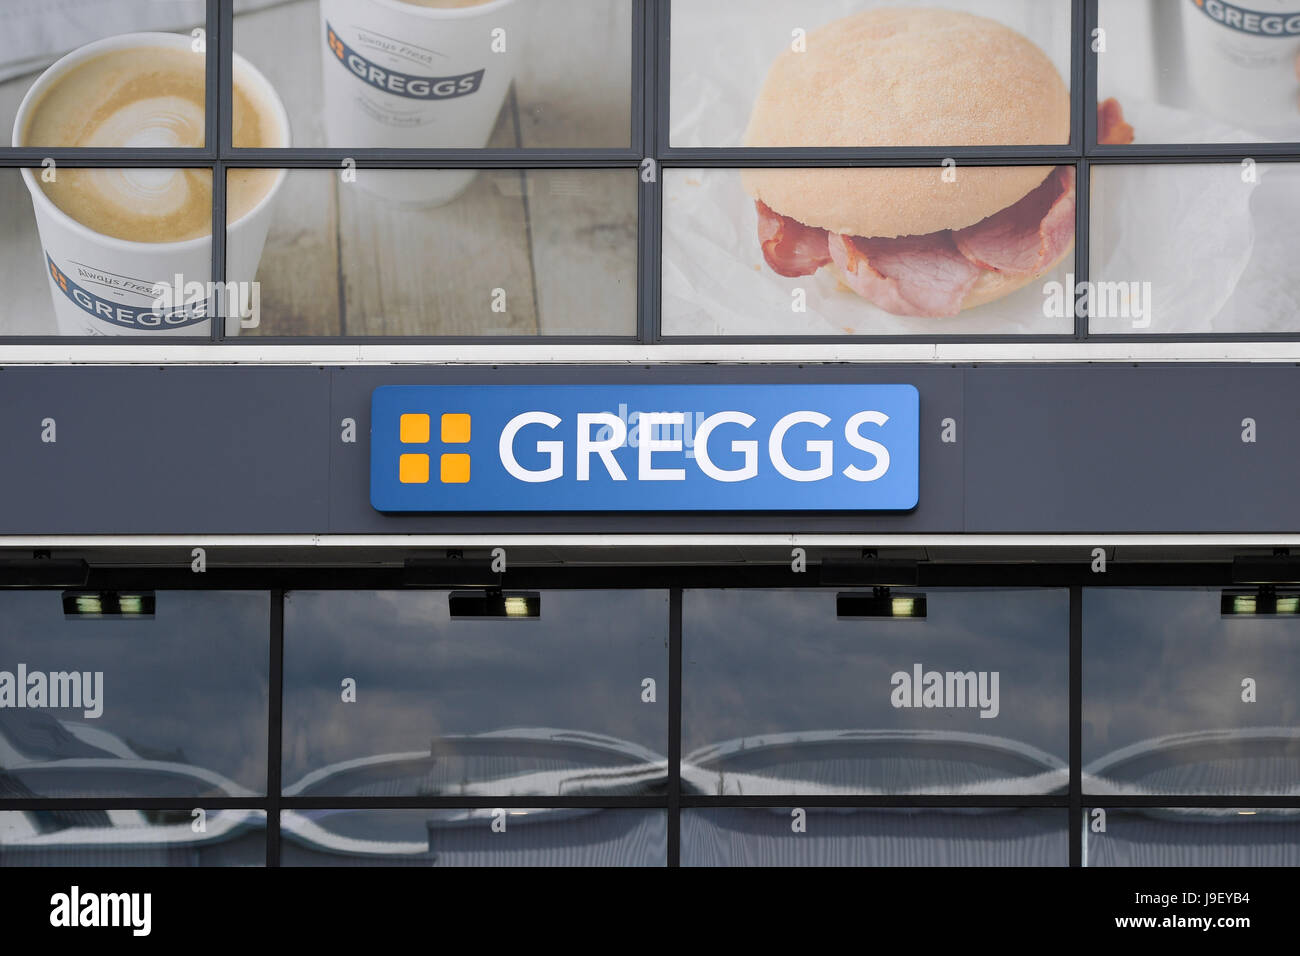 Greggs bakery sign Banque D'Images